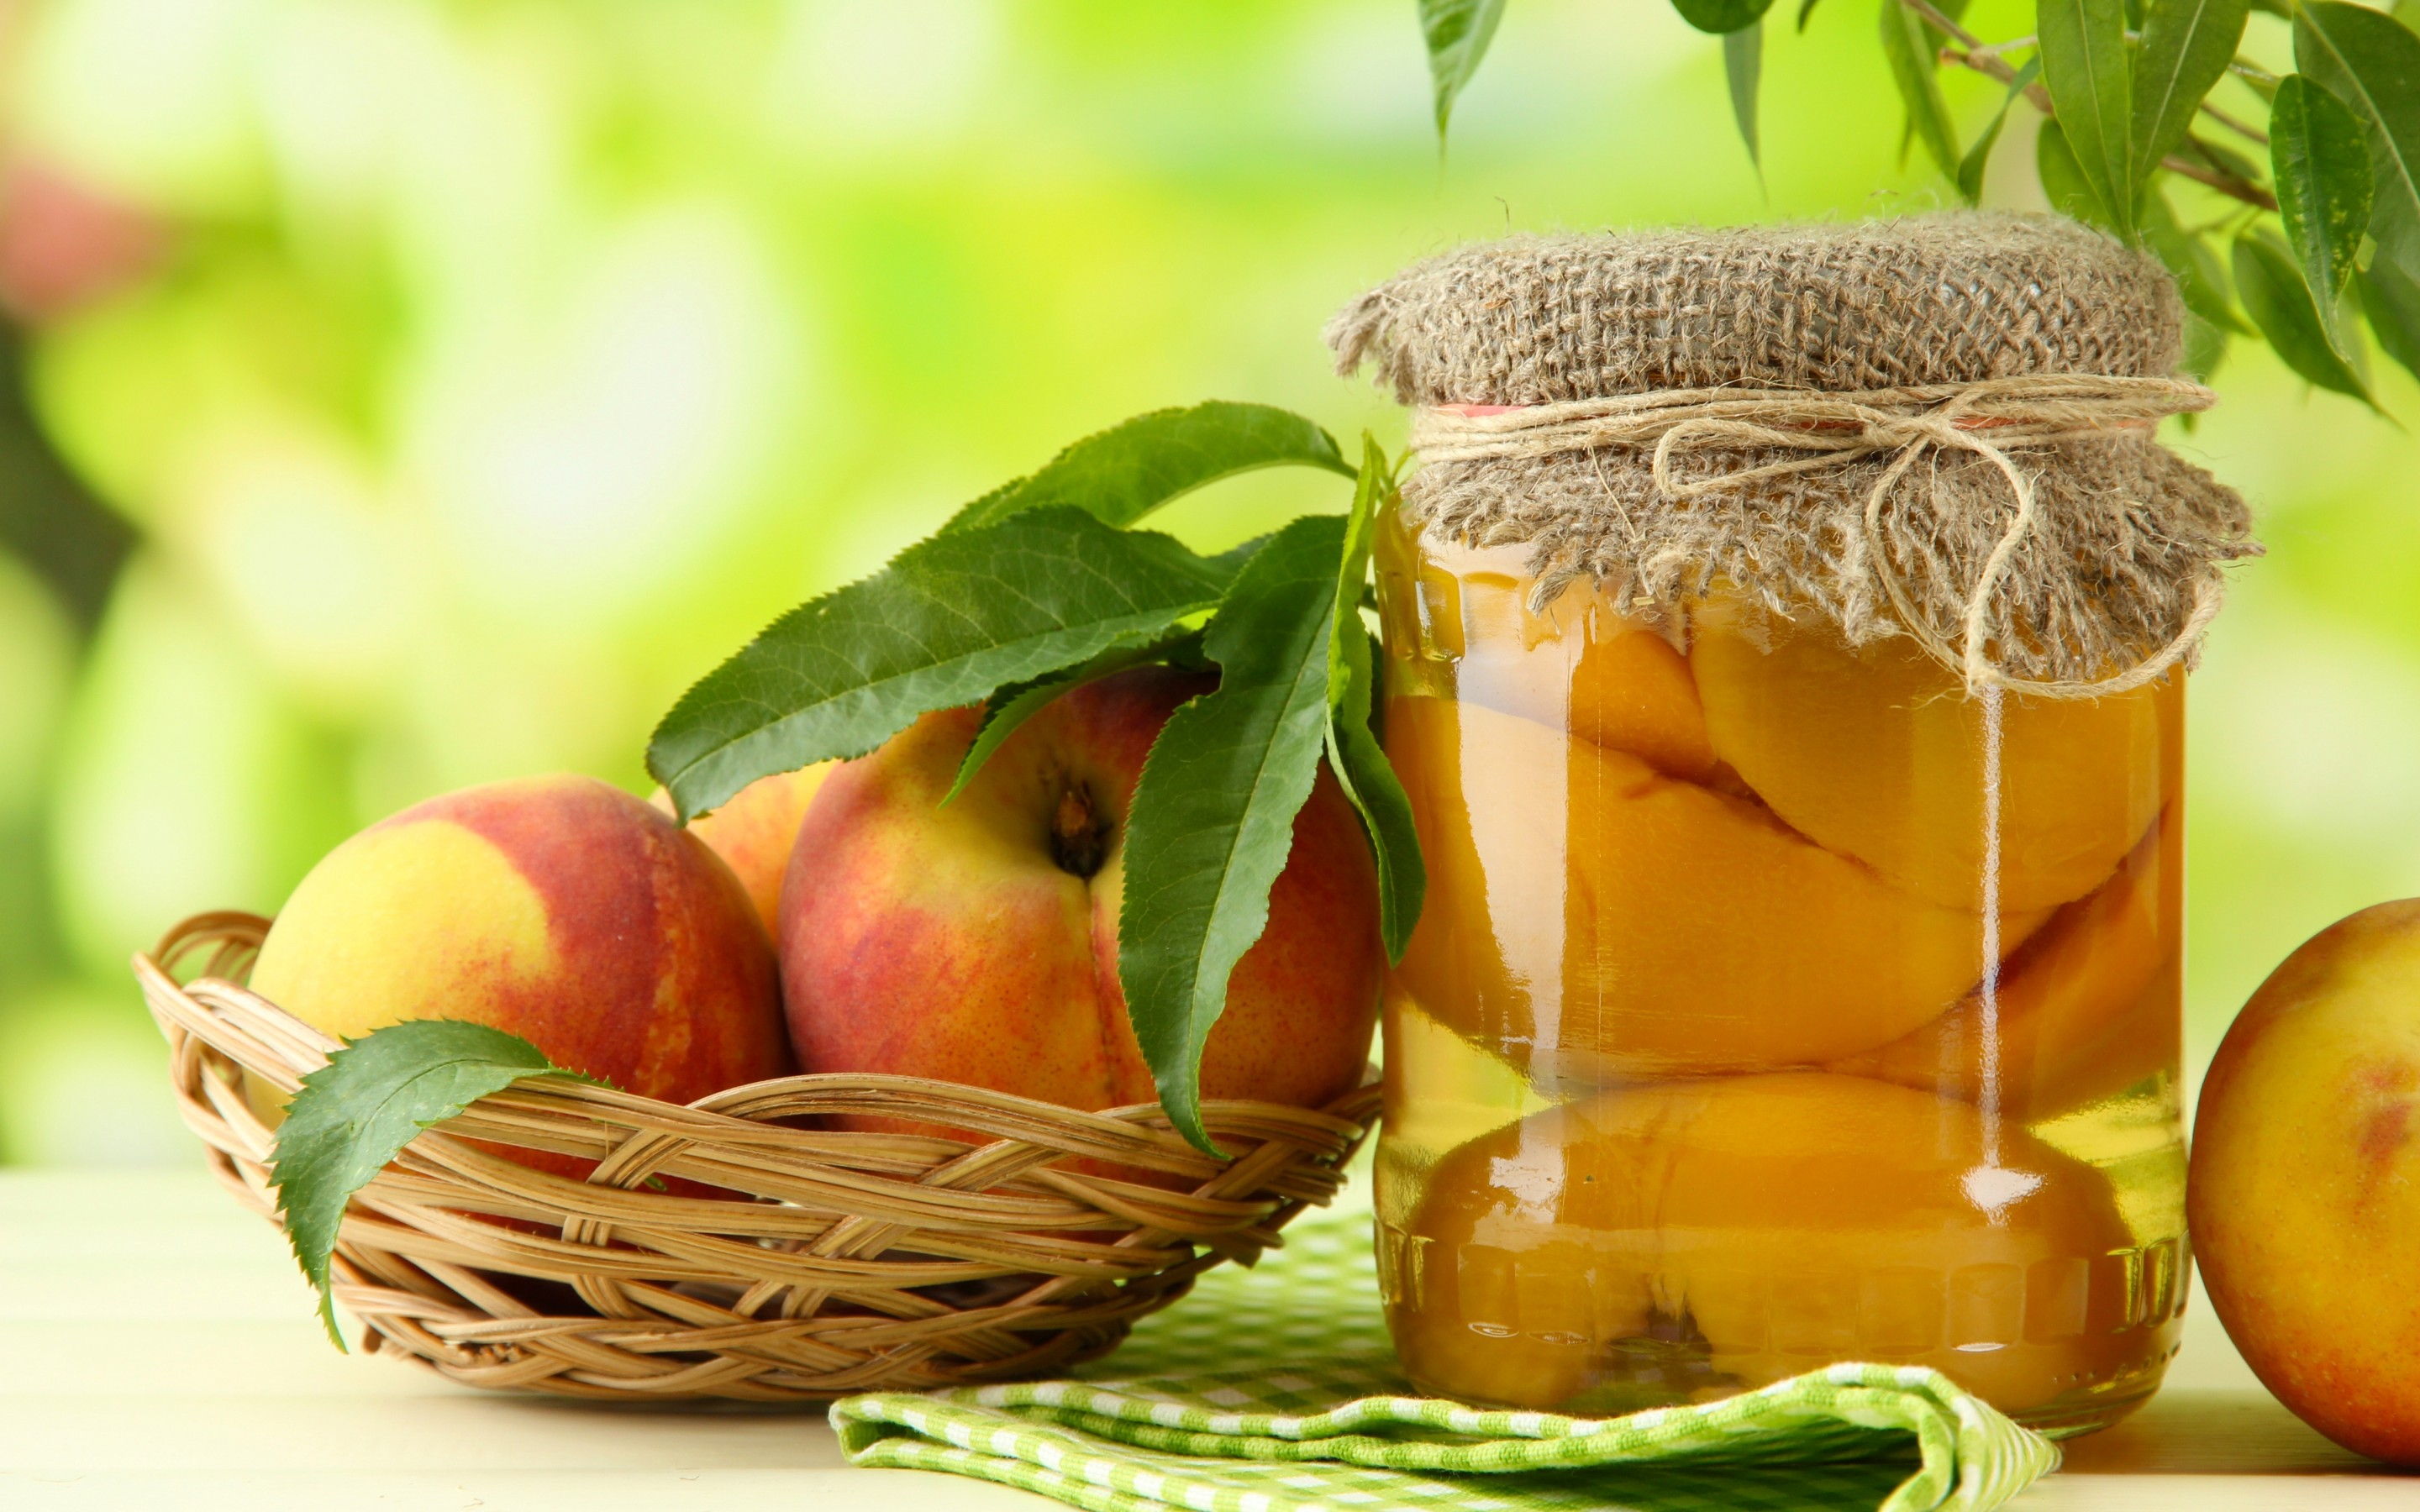 Food Peach HD Wallpaper | Background Image